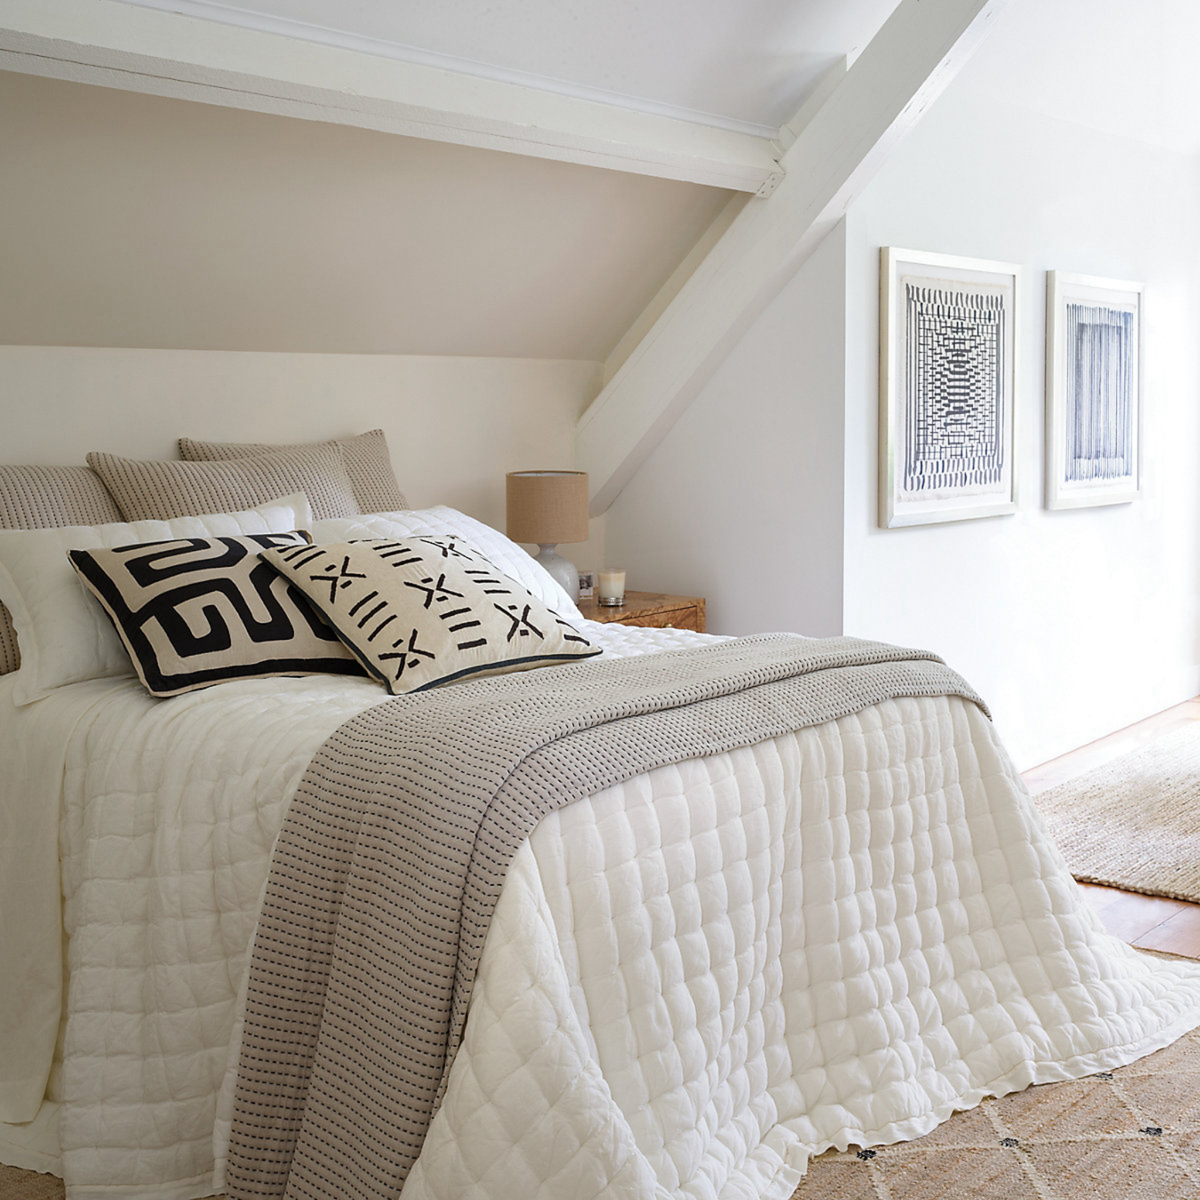 Bed Dressed in Natural Coordinate with Pine Cone Hill Pick Stitch Matelassé Coverlet &amp; Shams